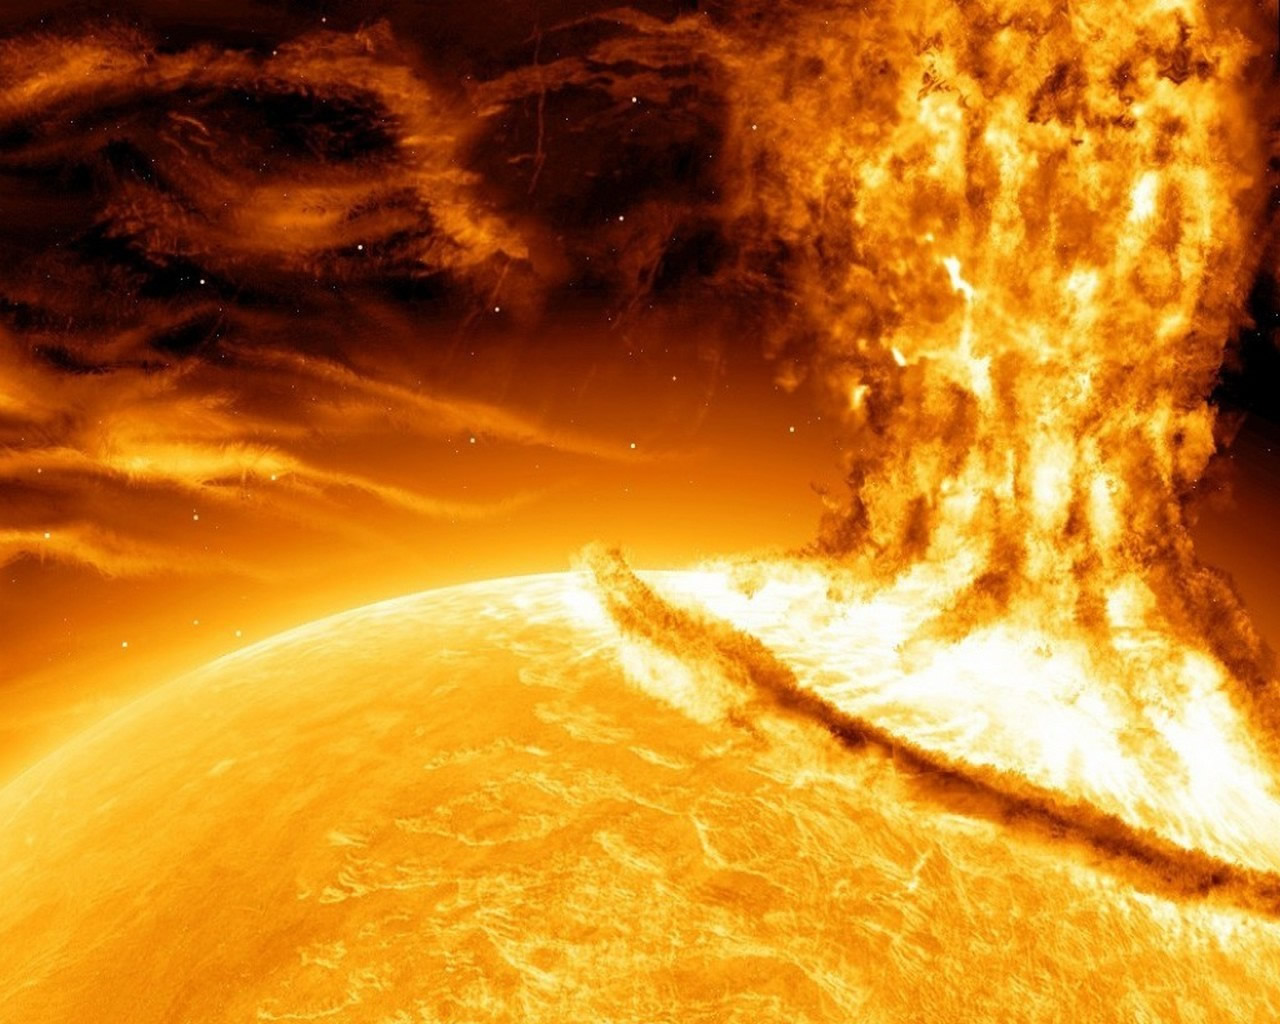 More powerful than all nuclear bombs: A record-breaking flare occurred on the Sun